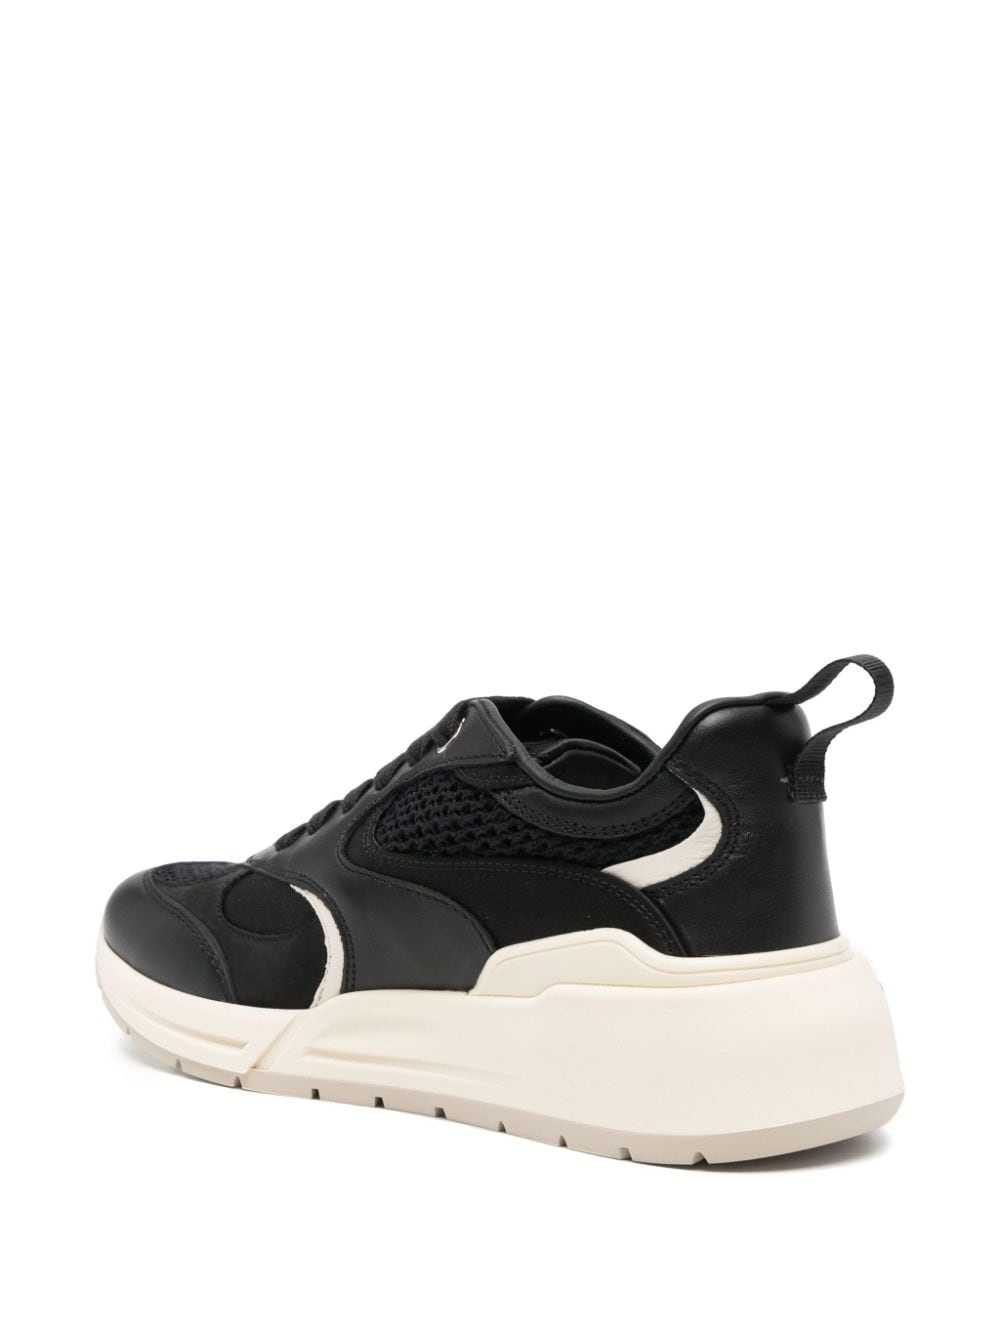 almond-toe panelled leather sneakers - 3